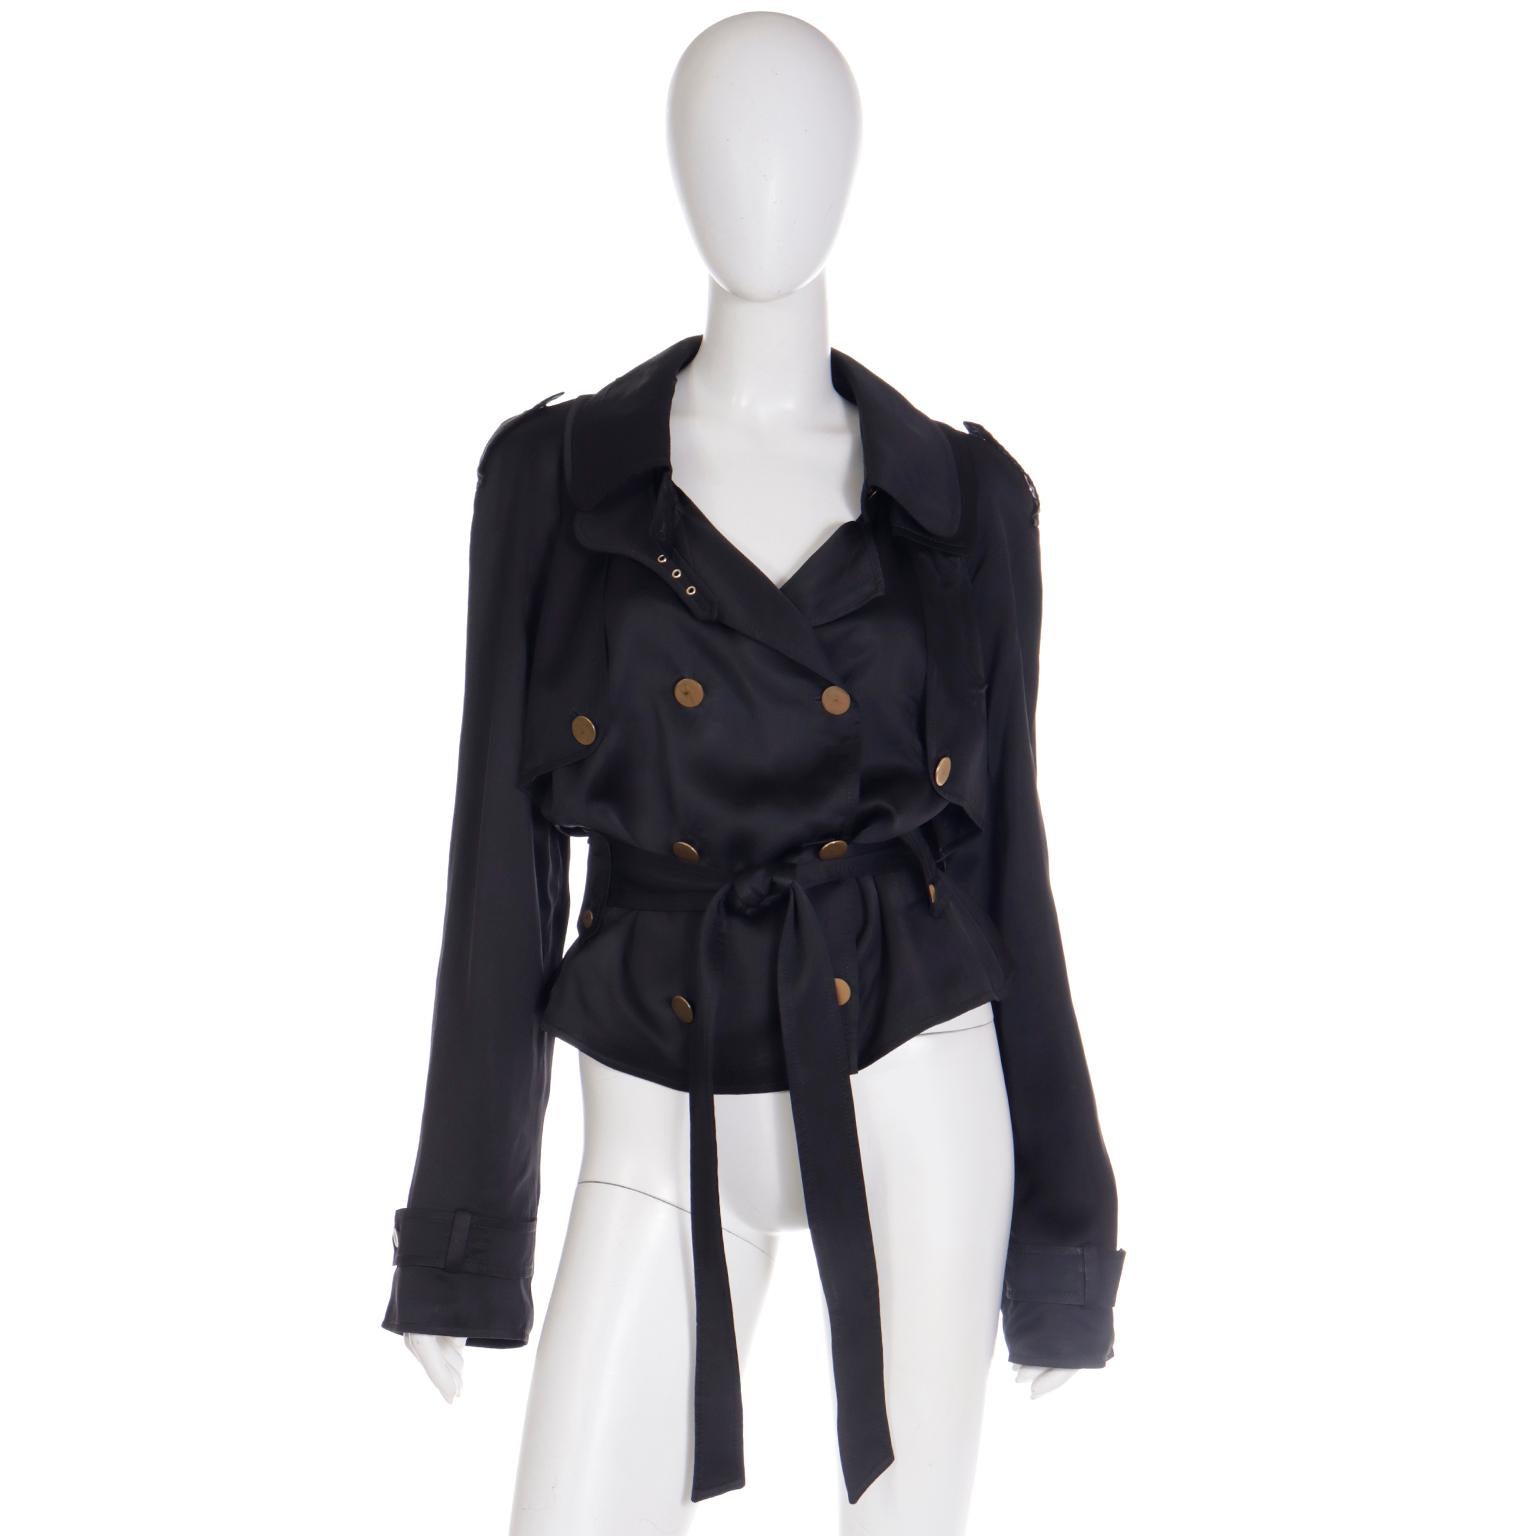 This vintage Dolce & Gabbana jacket is the perfect cropped trench! This double breasted jacket has all of the signature hallmarks of a trench coat like epaulettes, storm flaps, button tabs and a waist belt. We love the look of the jacket in such a